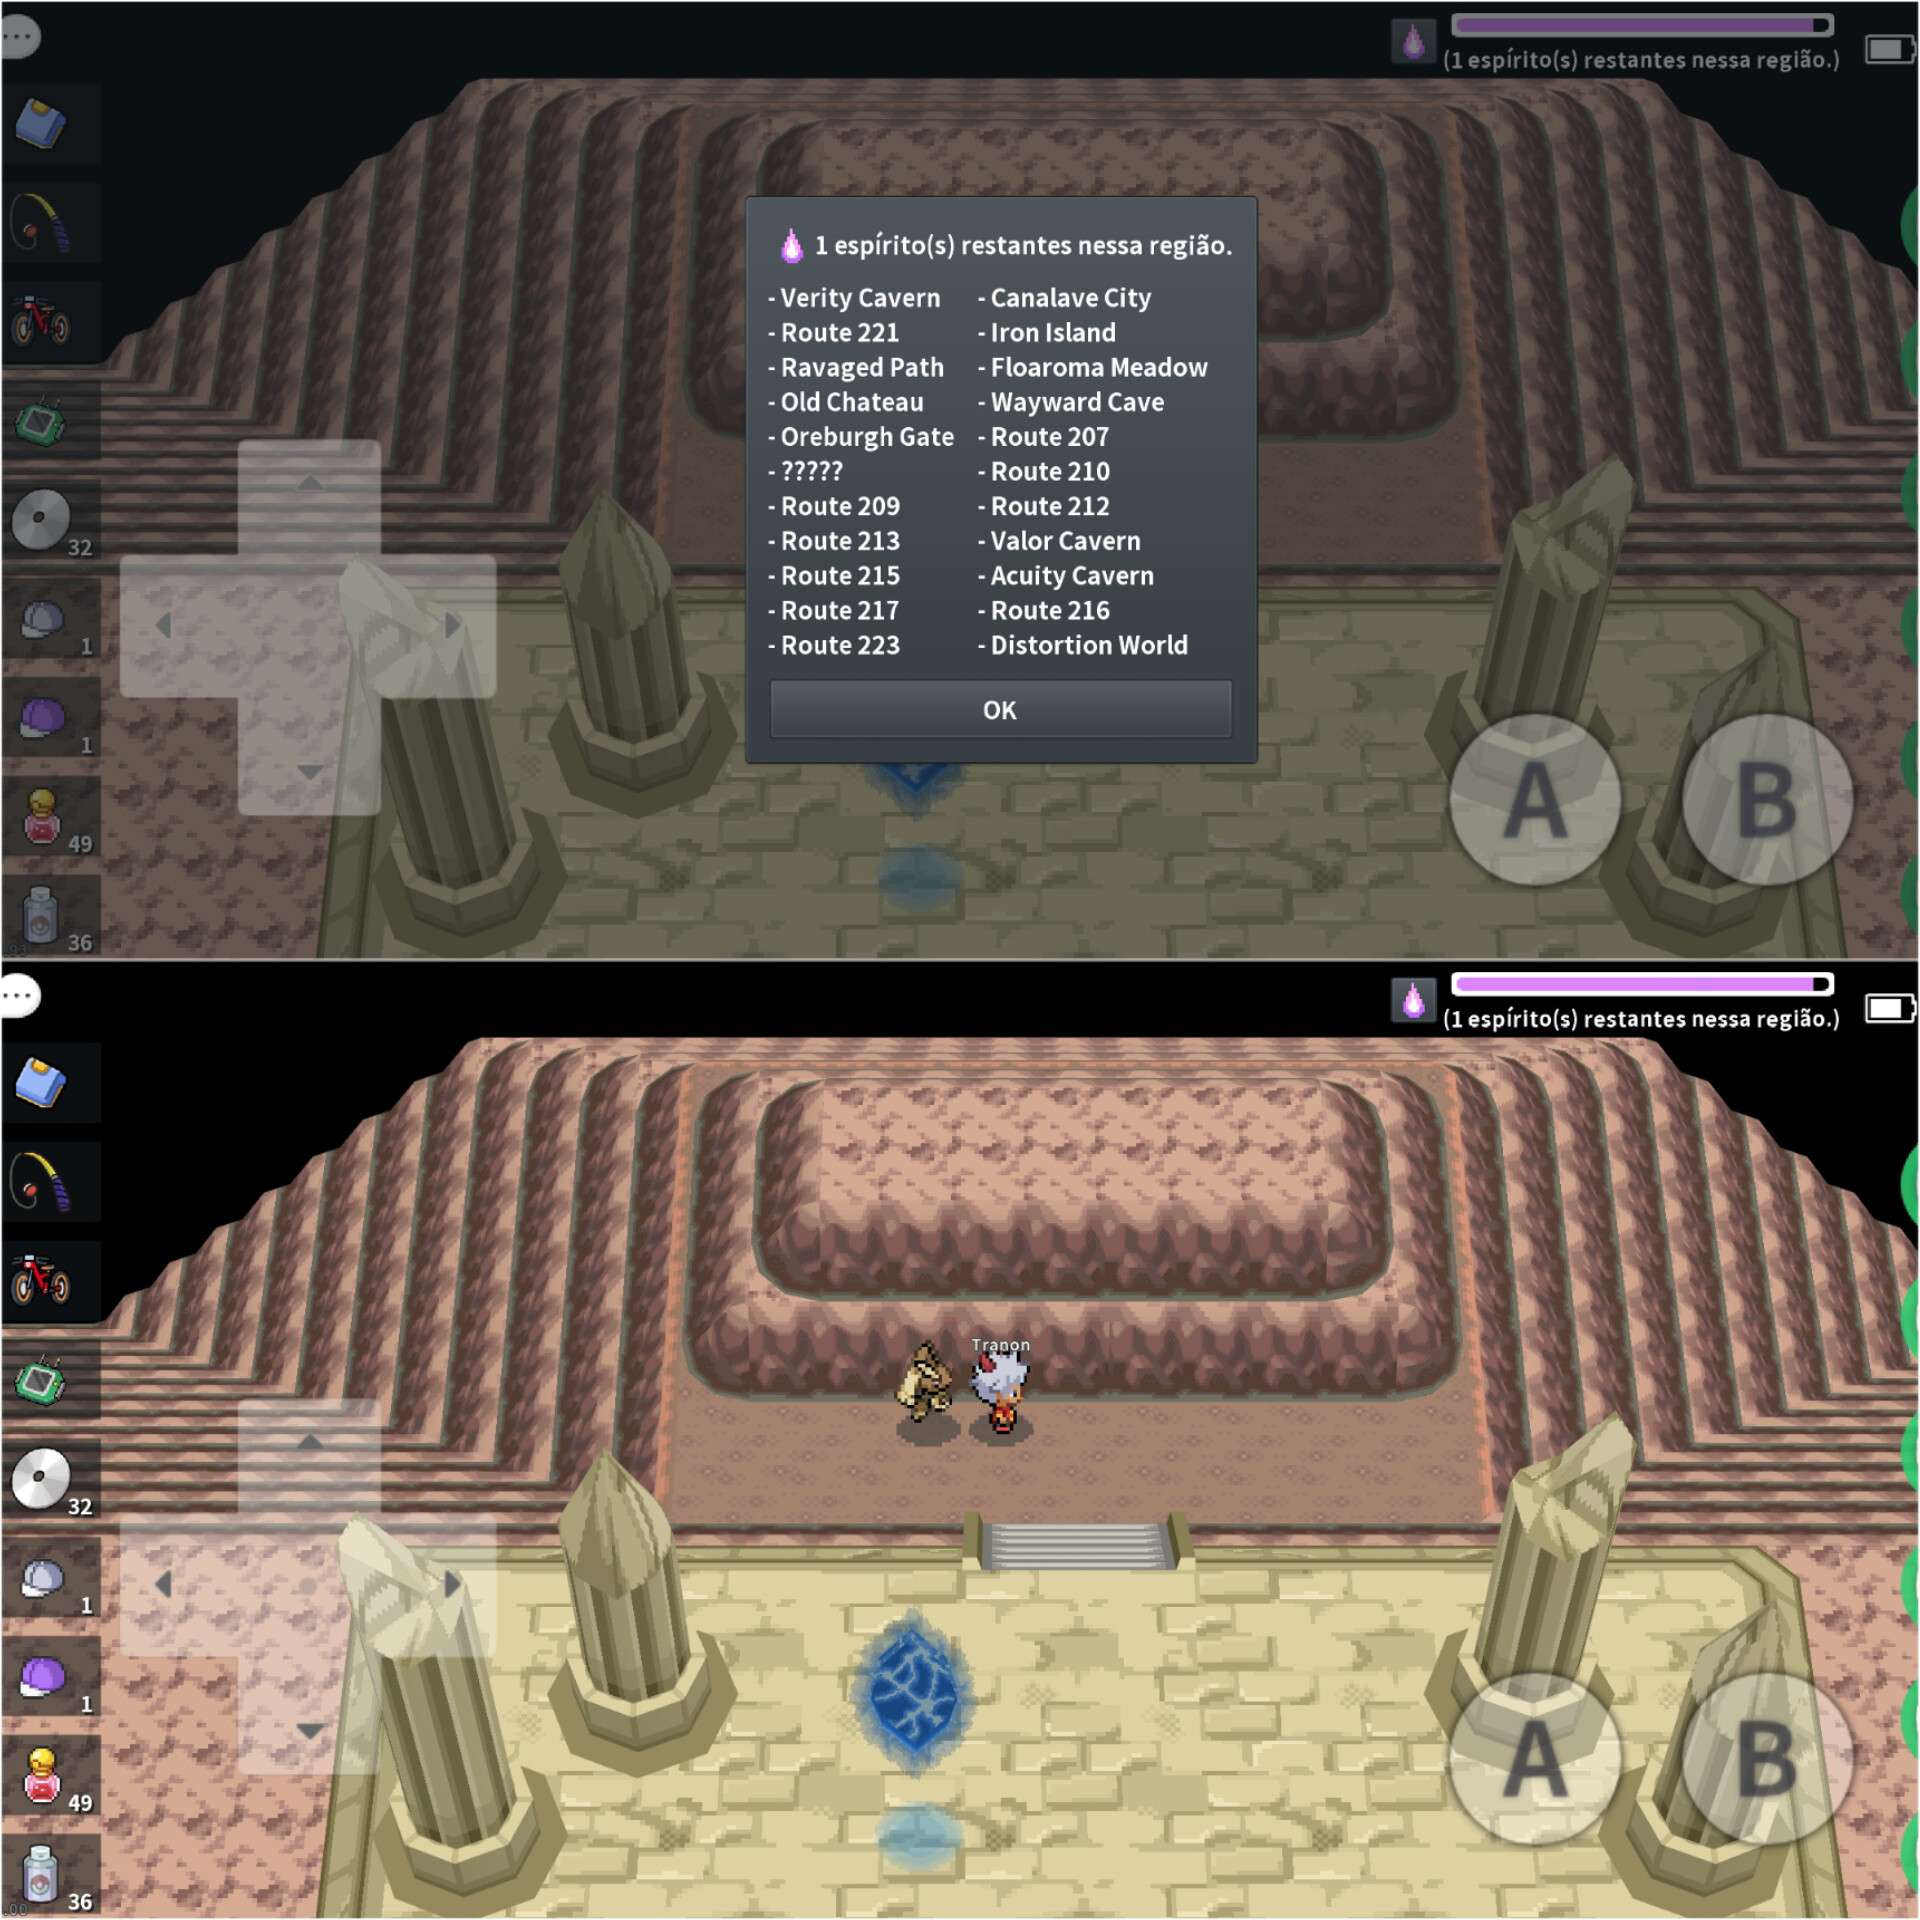 Every Hoenn wisp locations - General Discussion - PokeMMO